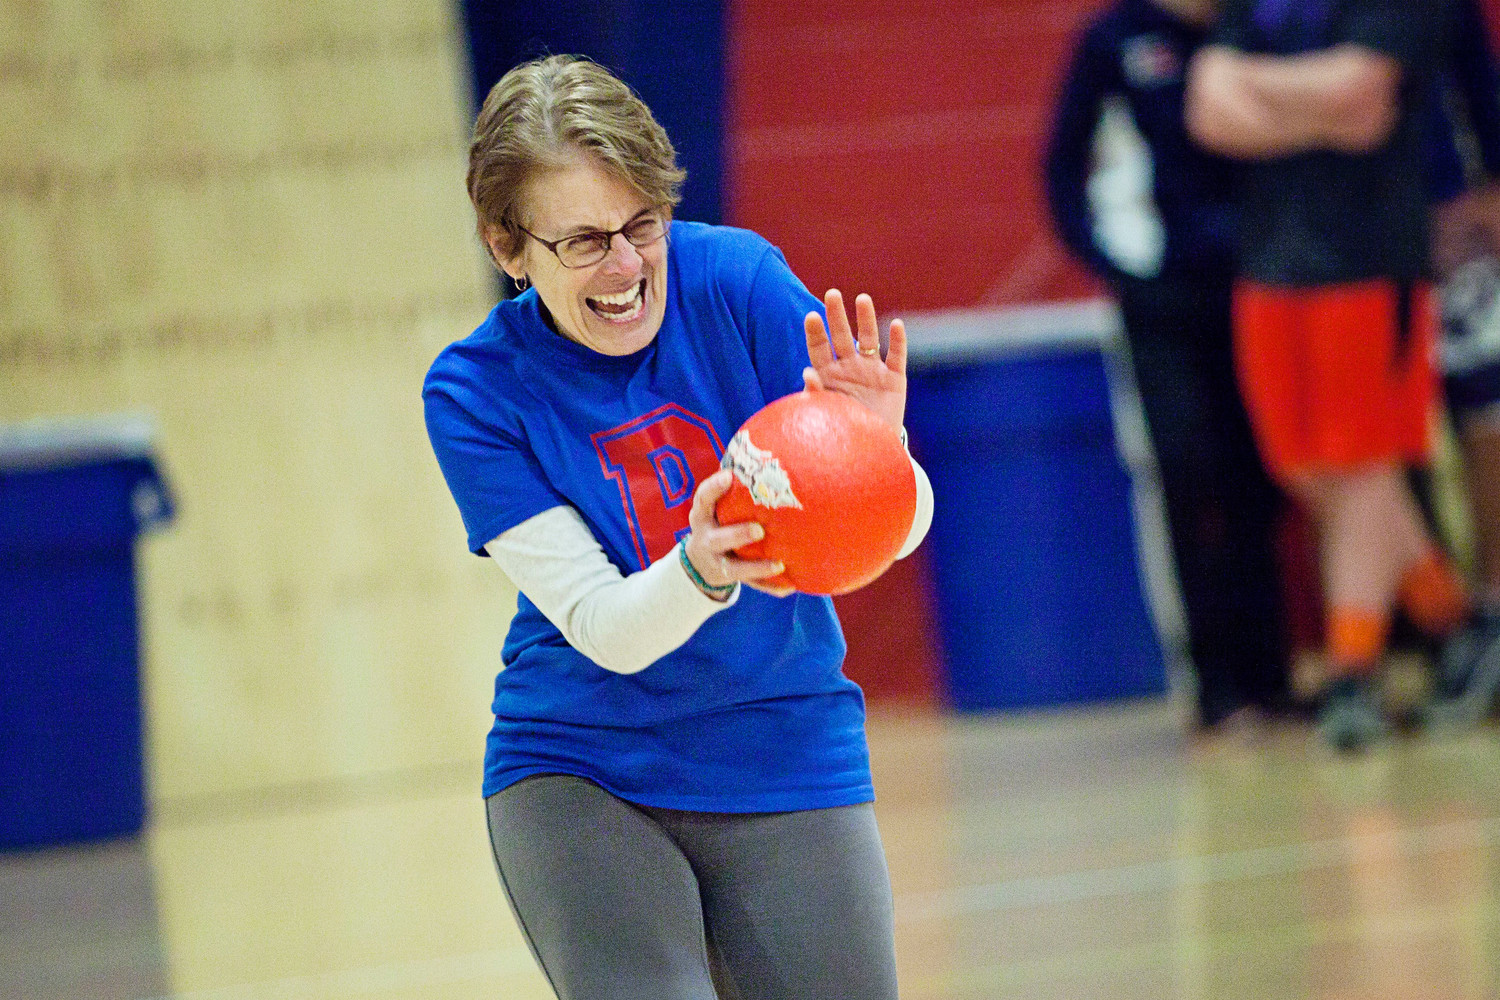 School Committee Chairwoman Terry Cortvriend, a member of The Hard Targets, flinches as a ball comes toward her.